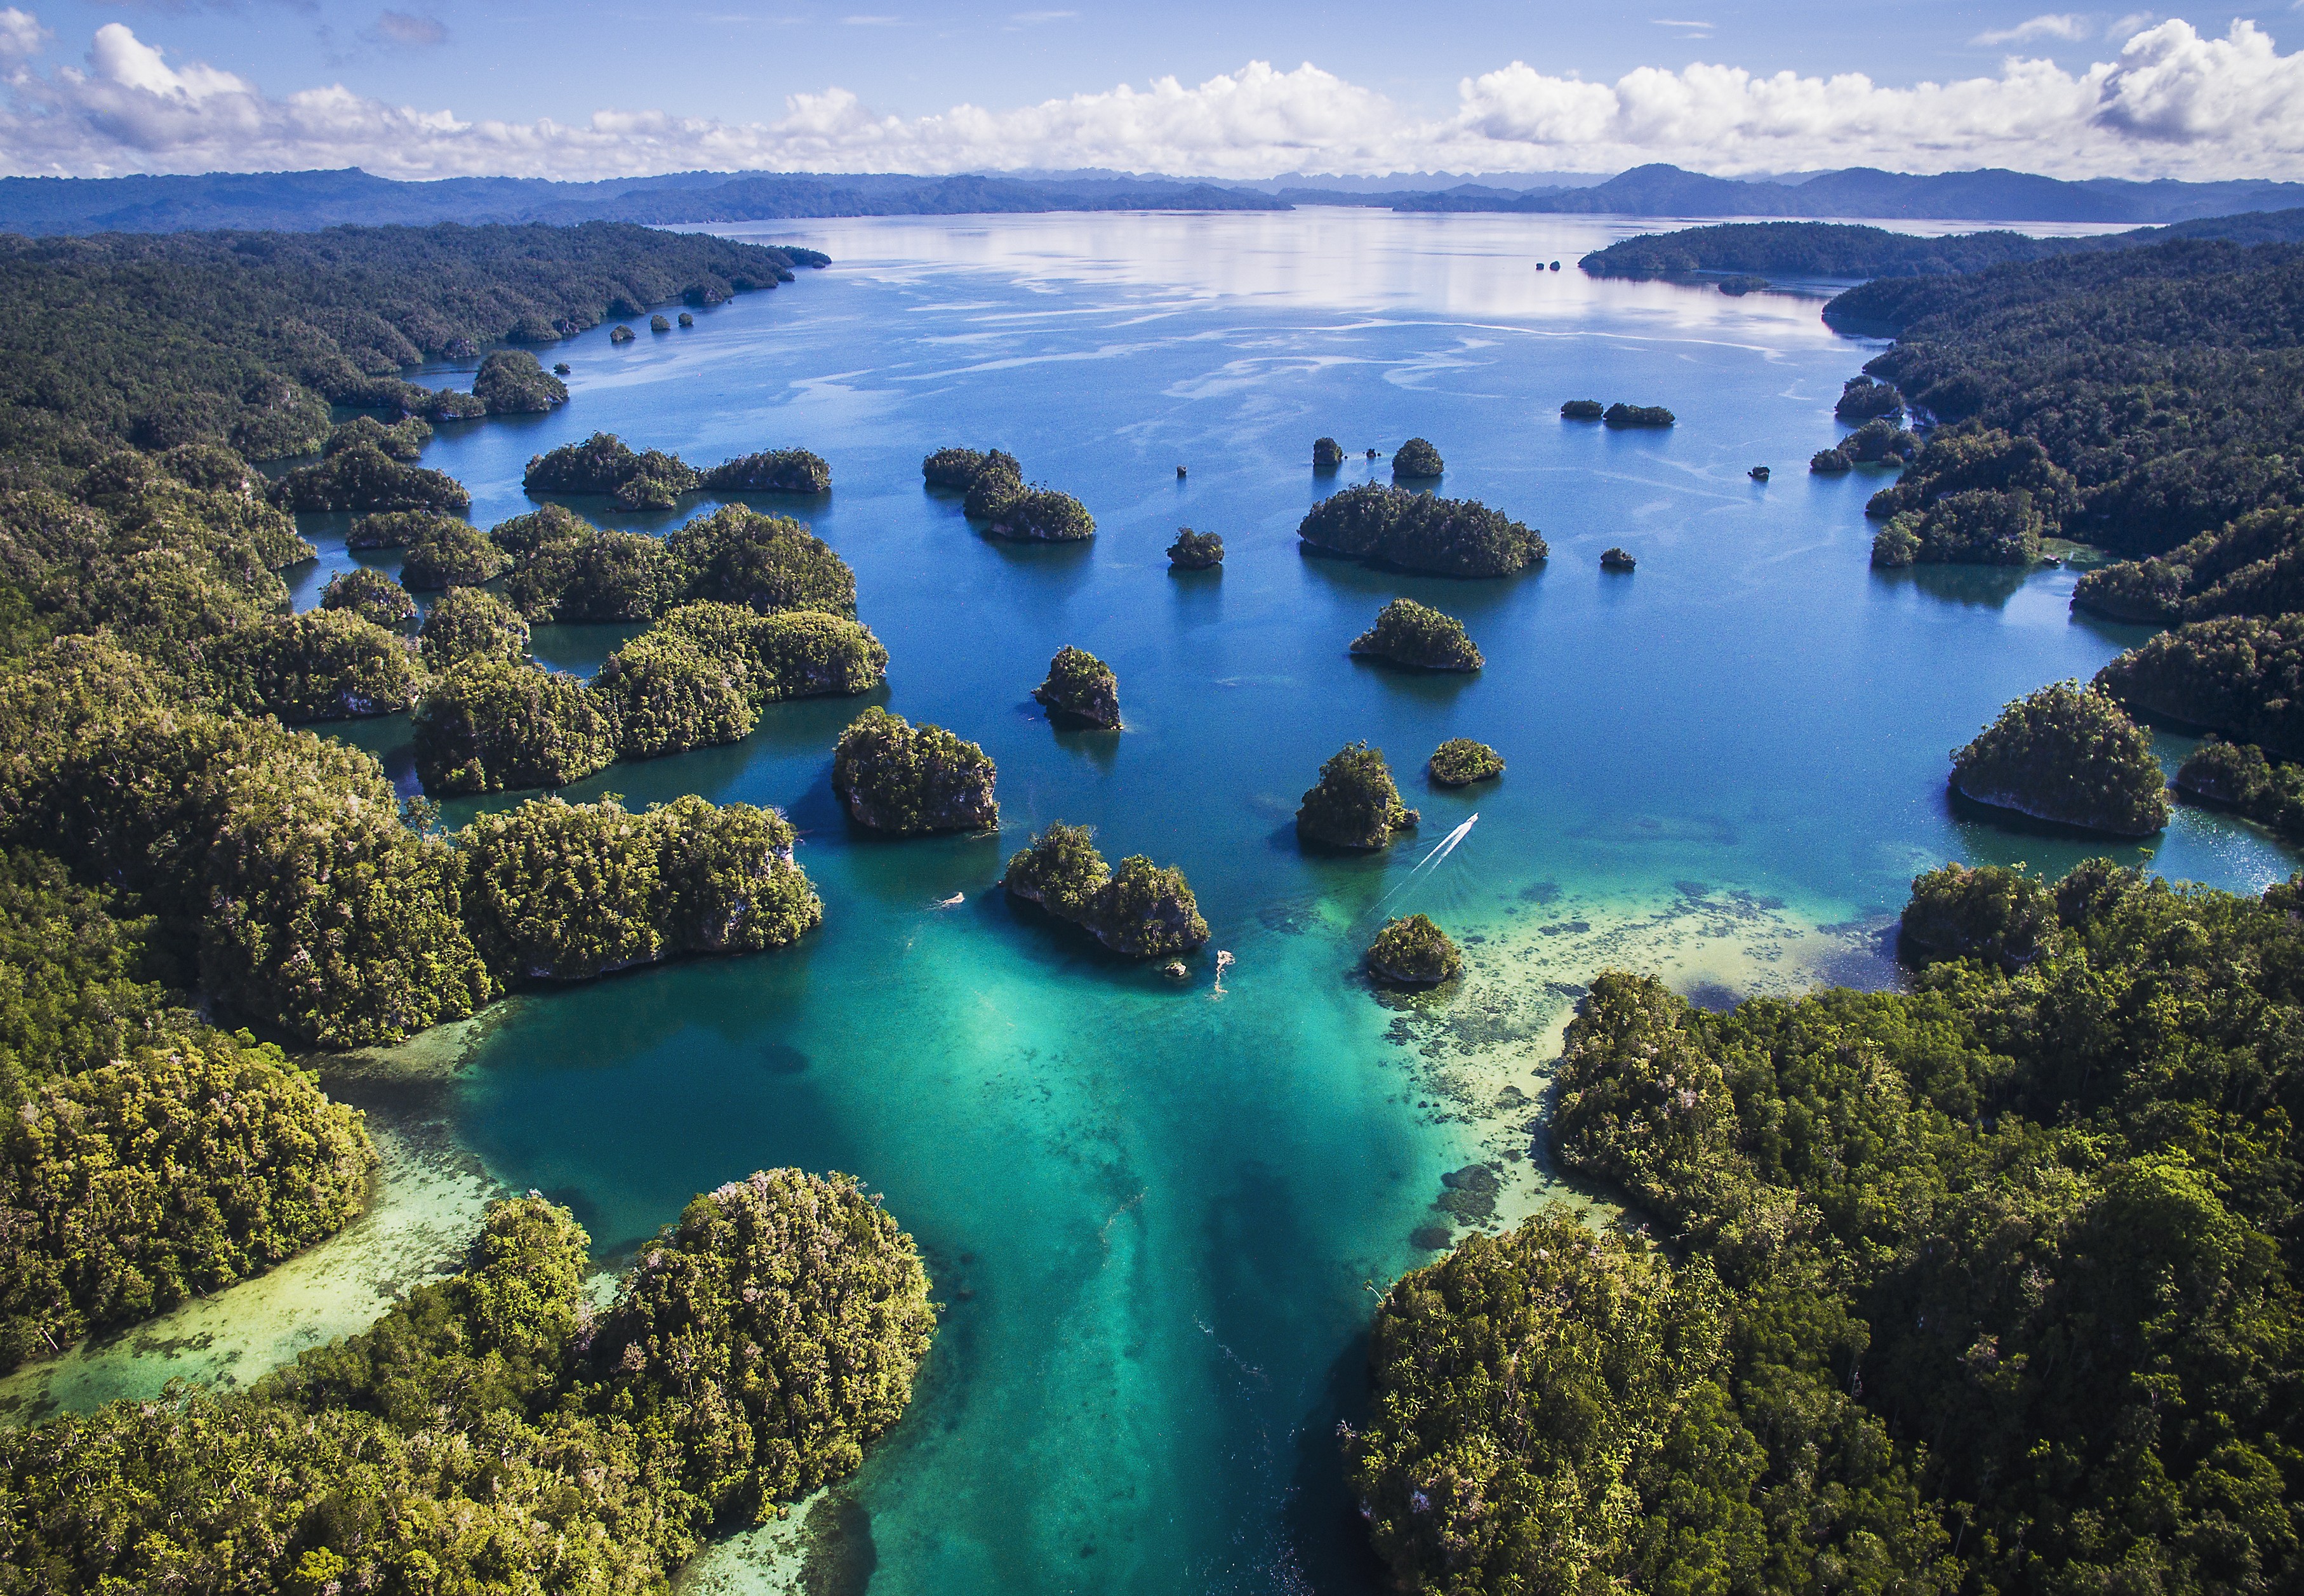 An enchanting area of the Raja Ampat Islands known as ‘The Passage’. Photo: Getty Images/iStockphoto